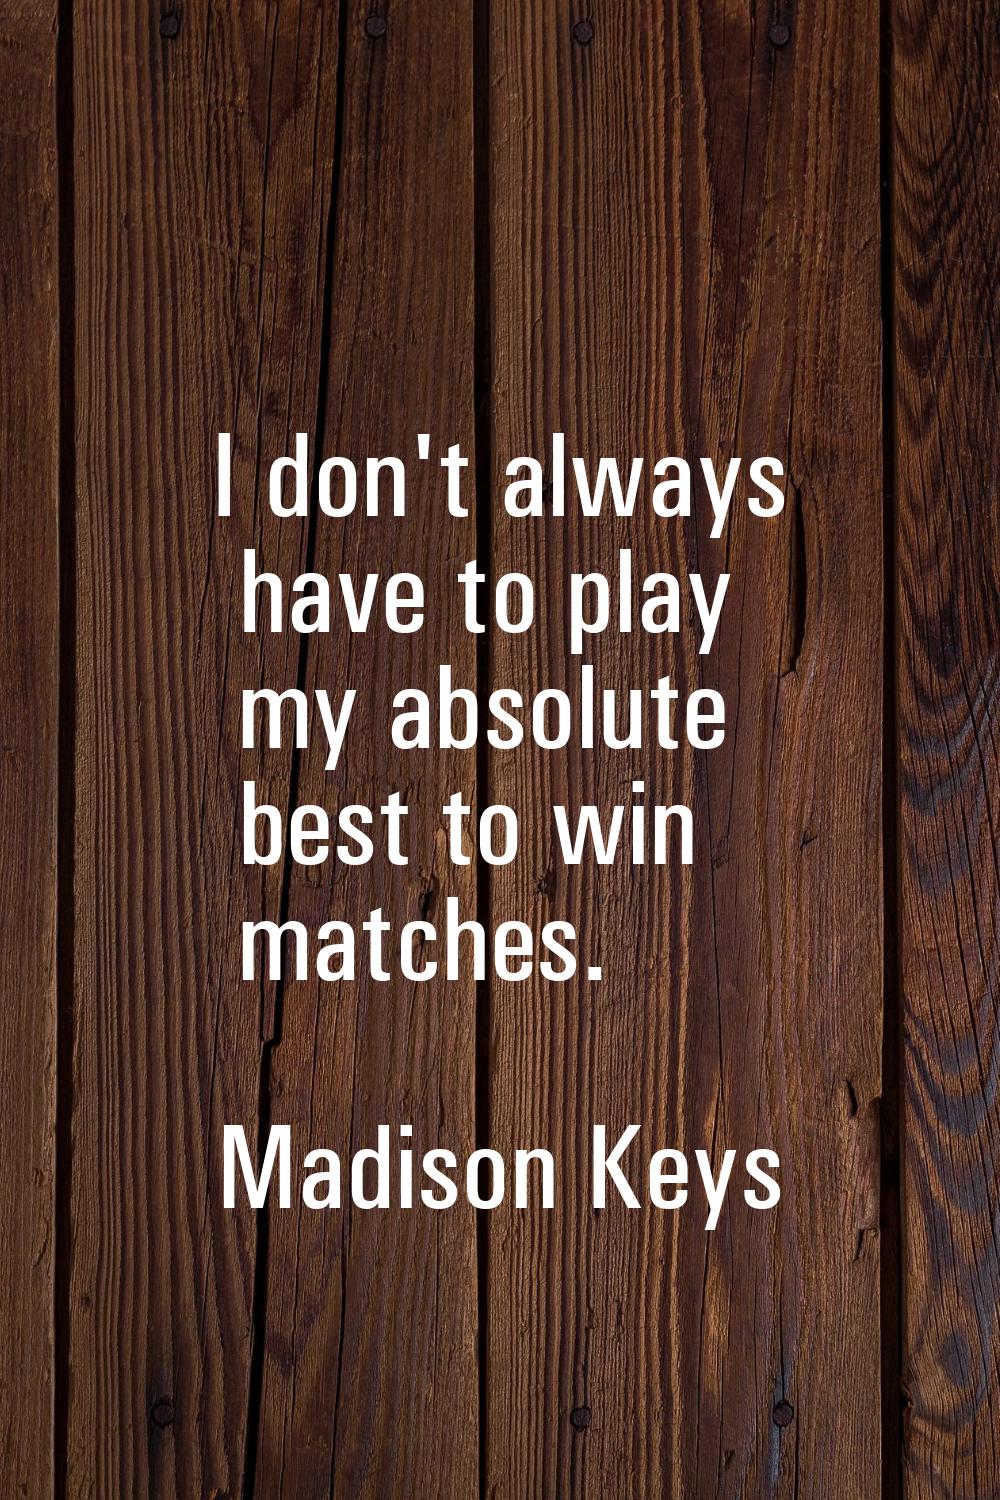 I don't always have to play my absolute best to win matches.